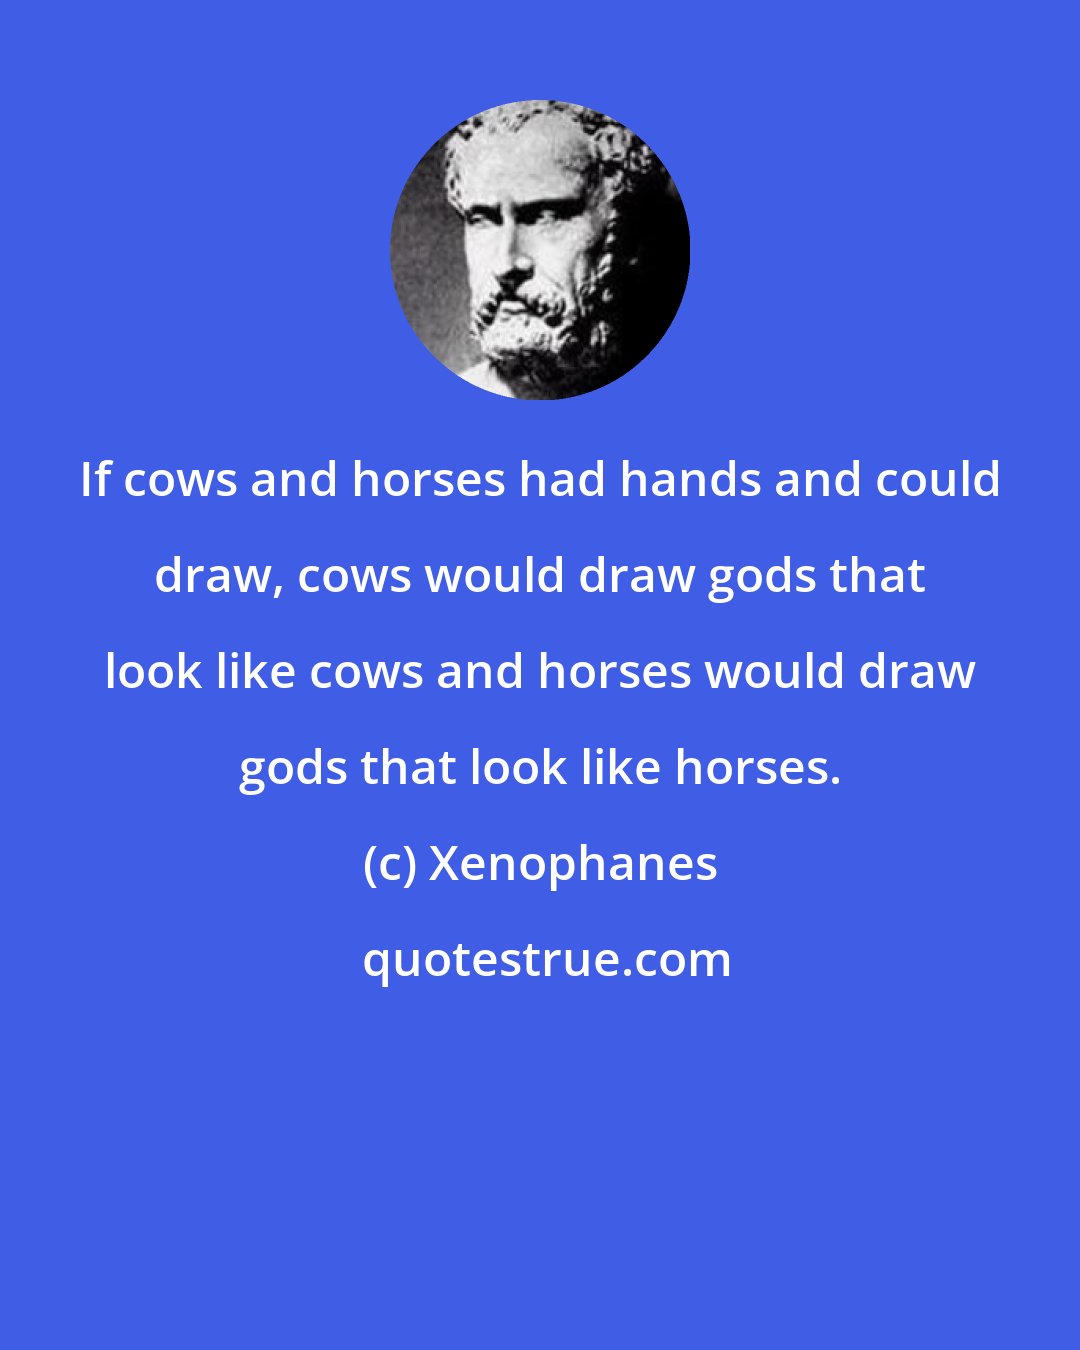 Xenophanes: If cows and horses had hands and could draw, cows would draw gods that look like cows and horses would draw gods that look like horses.